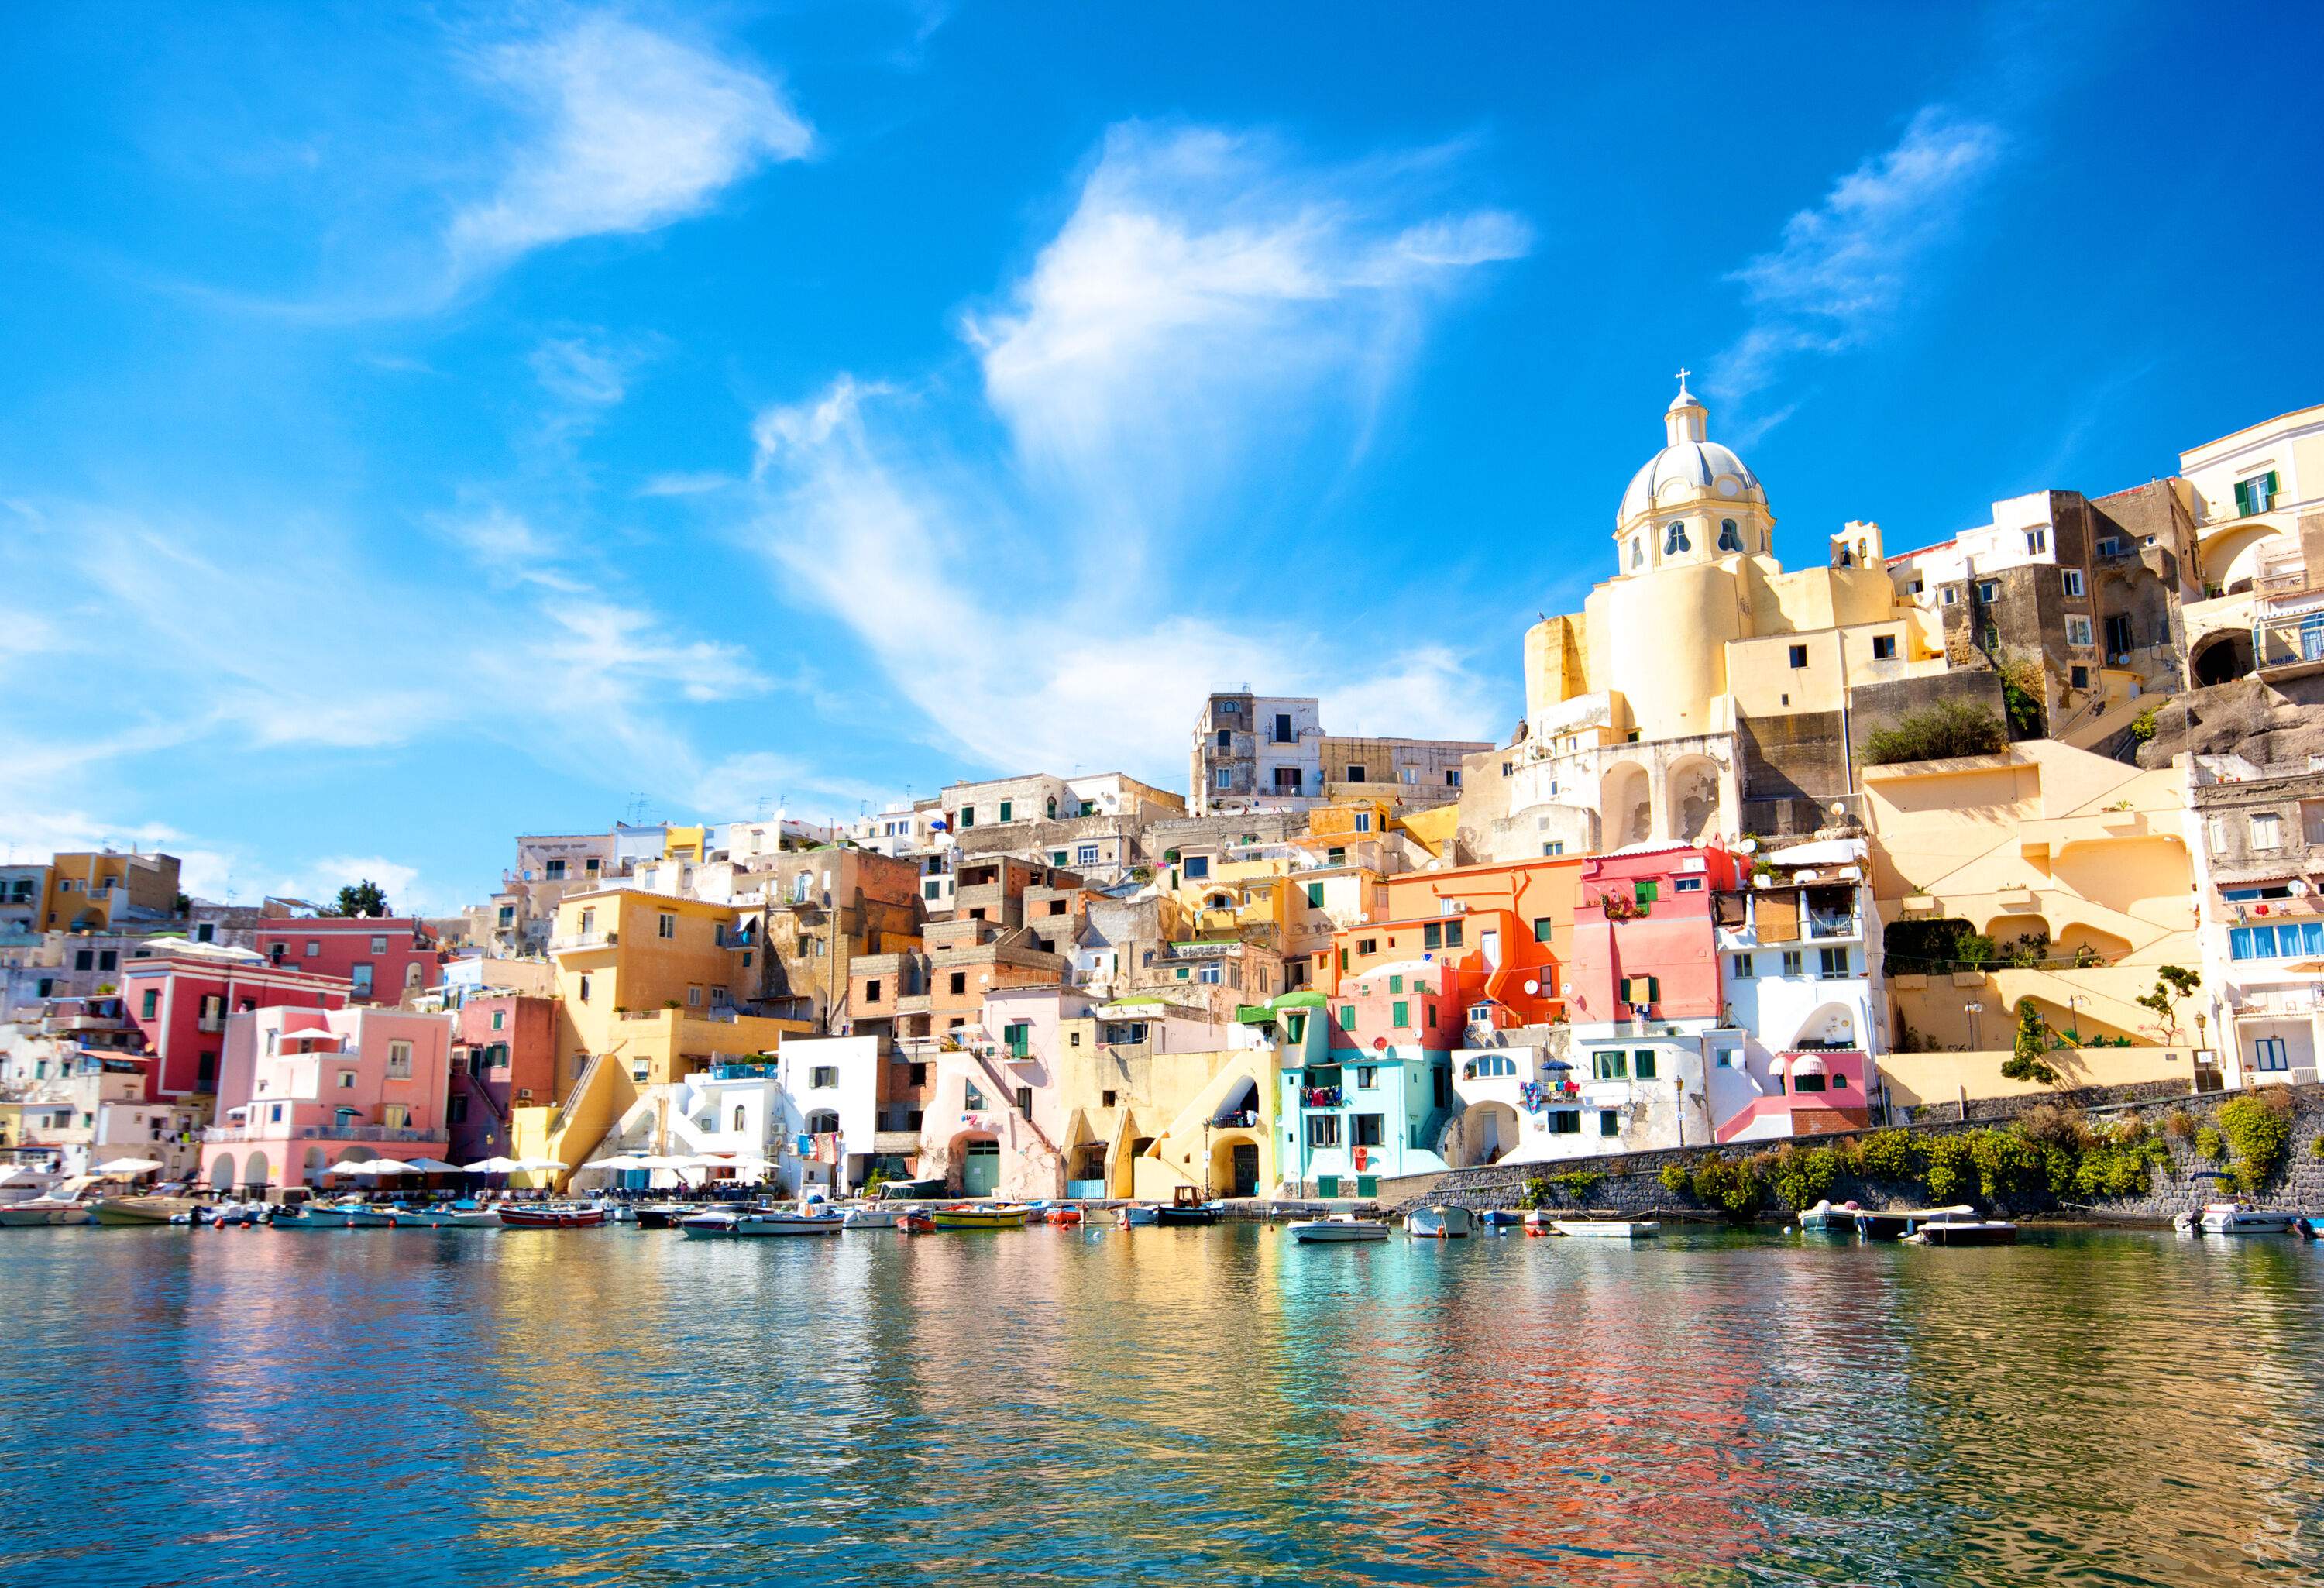 A seashore hill with brightly painted buildings in the Mediterranean style.